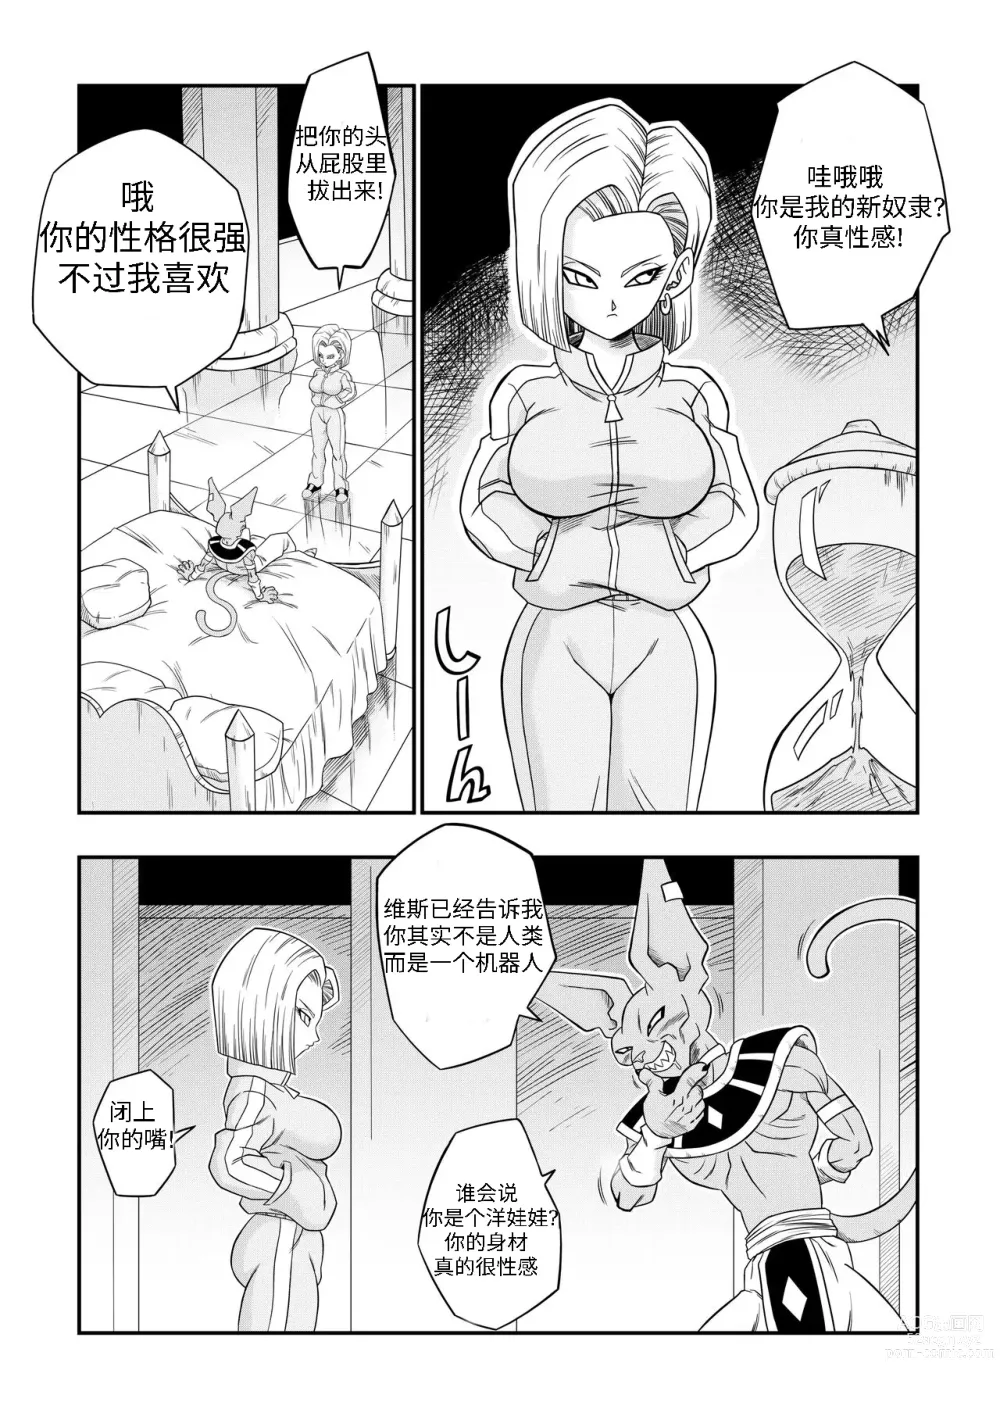 Page 12 of doujinshi 没人能违抗比鲁斯